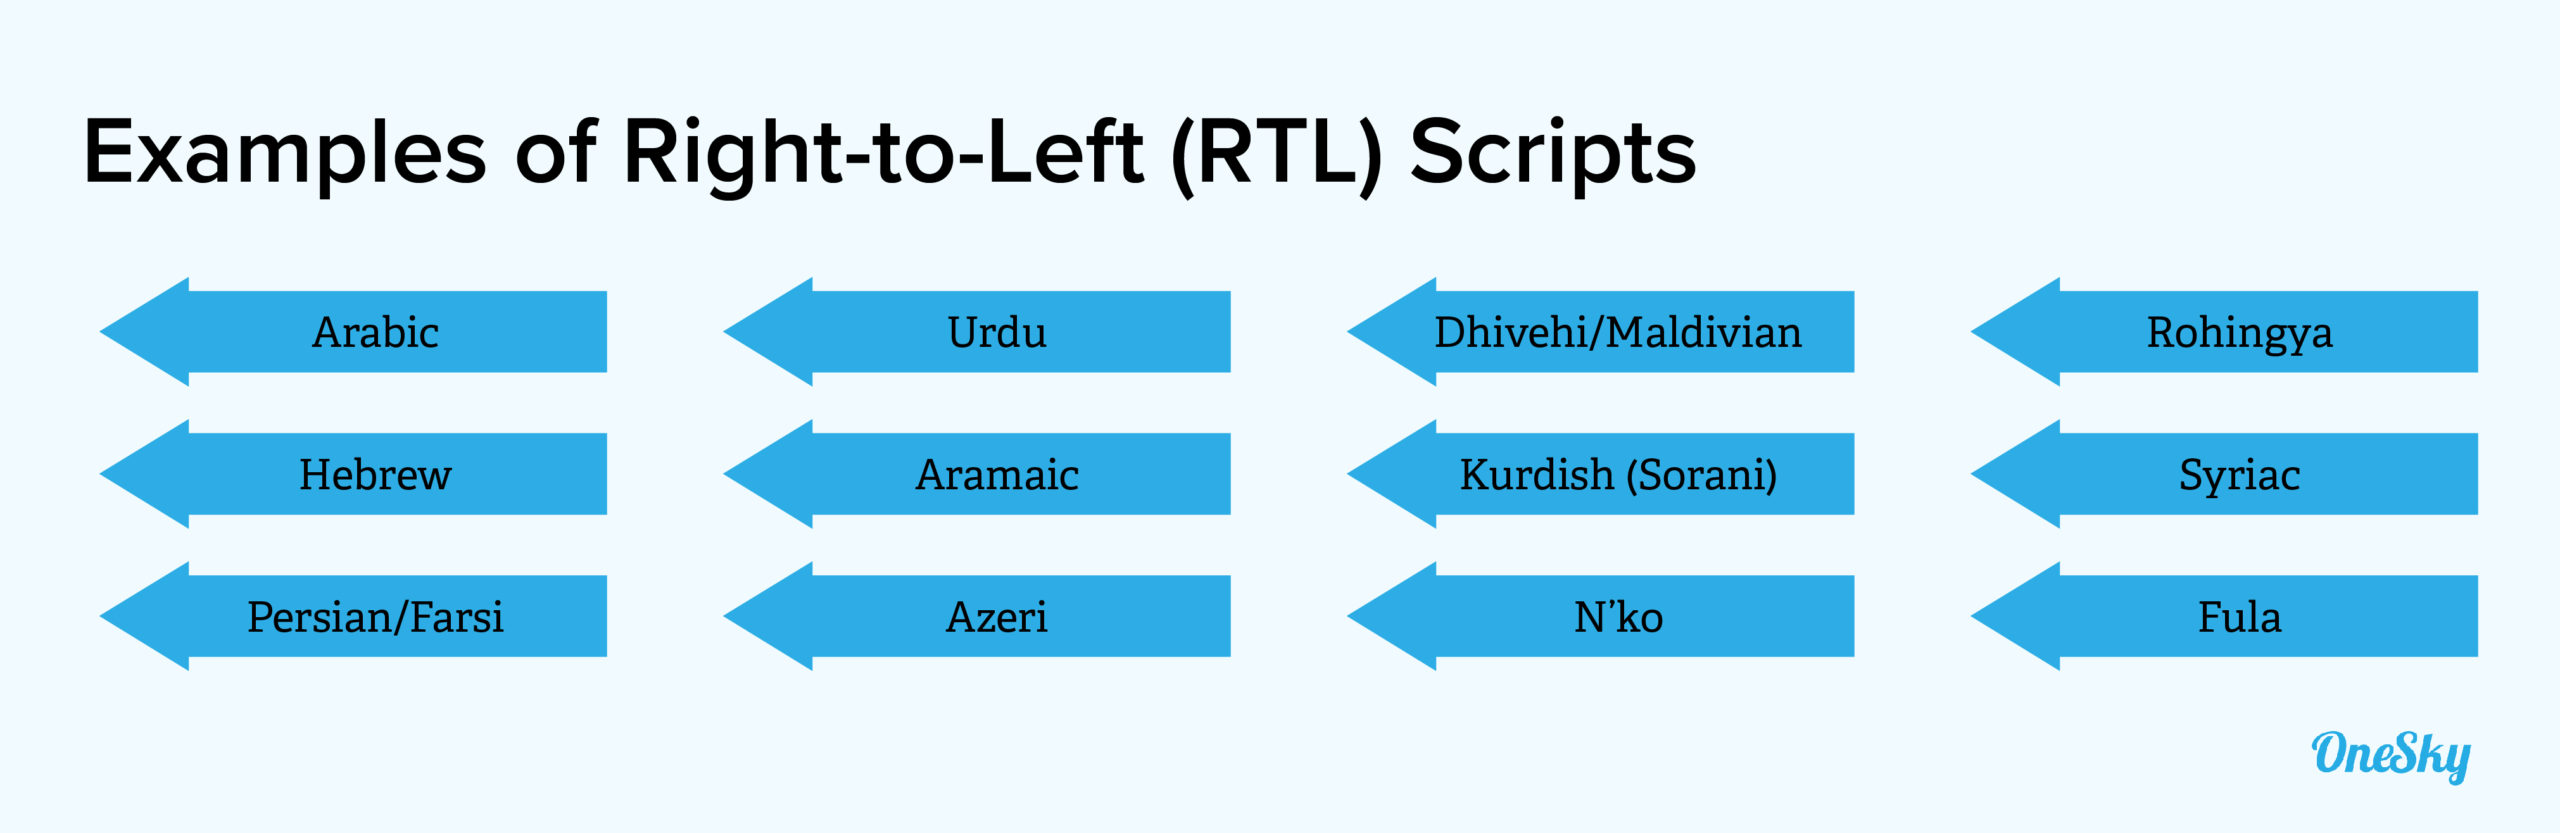 What Is Right-to-Left (RTL) Localization